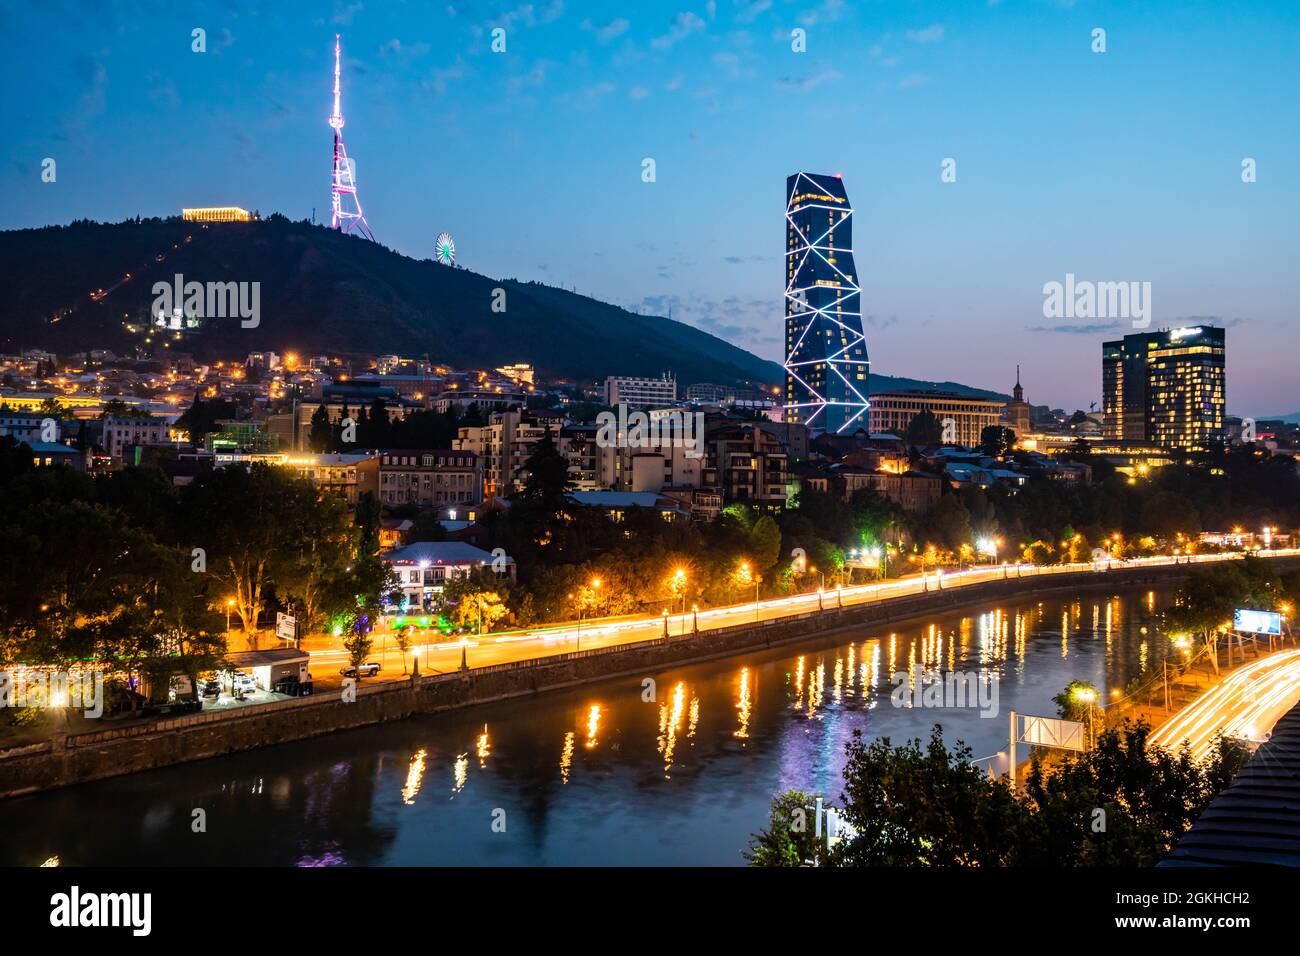 Colorful view of illuminated Mtkvari river in Tbilisi Georgia at night from above Stock Photo